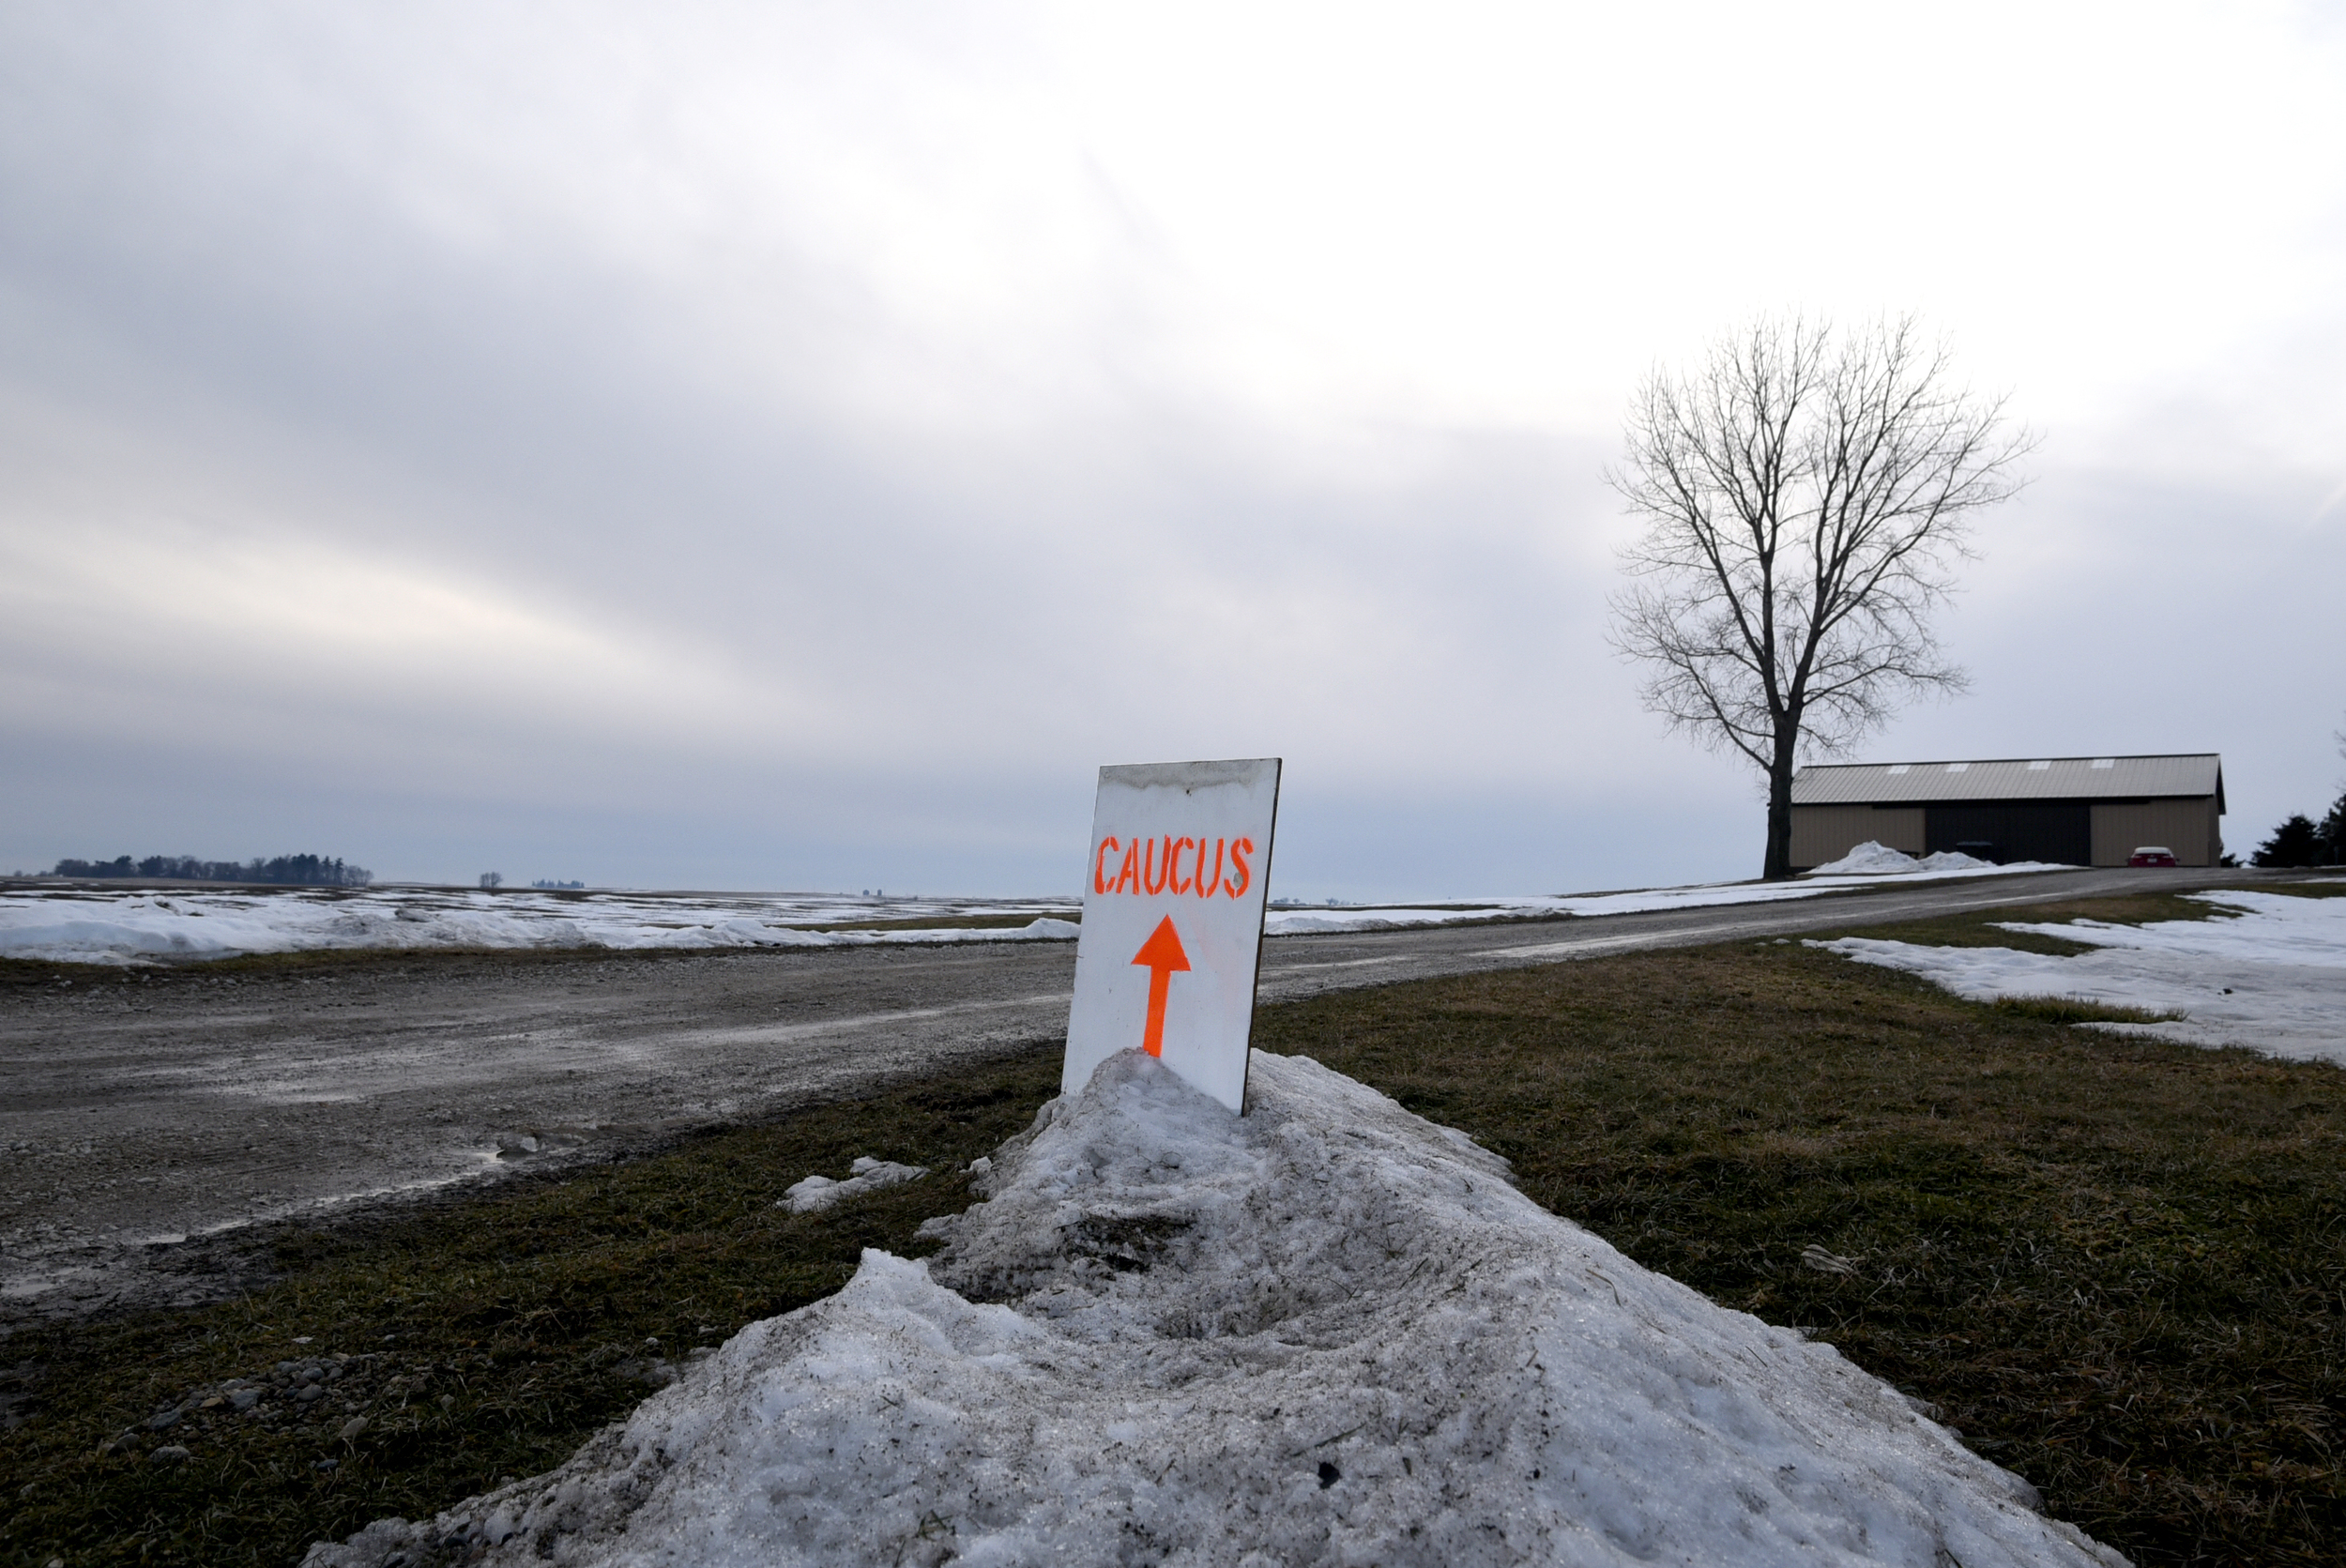   A sign directs caucus goers to the home of Gary and Mary Weaver in Rippey, Iowa February 1, 2016. REUTERS/Nick Oxford  